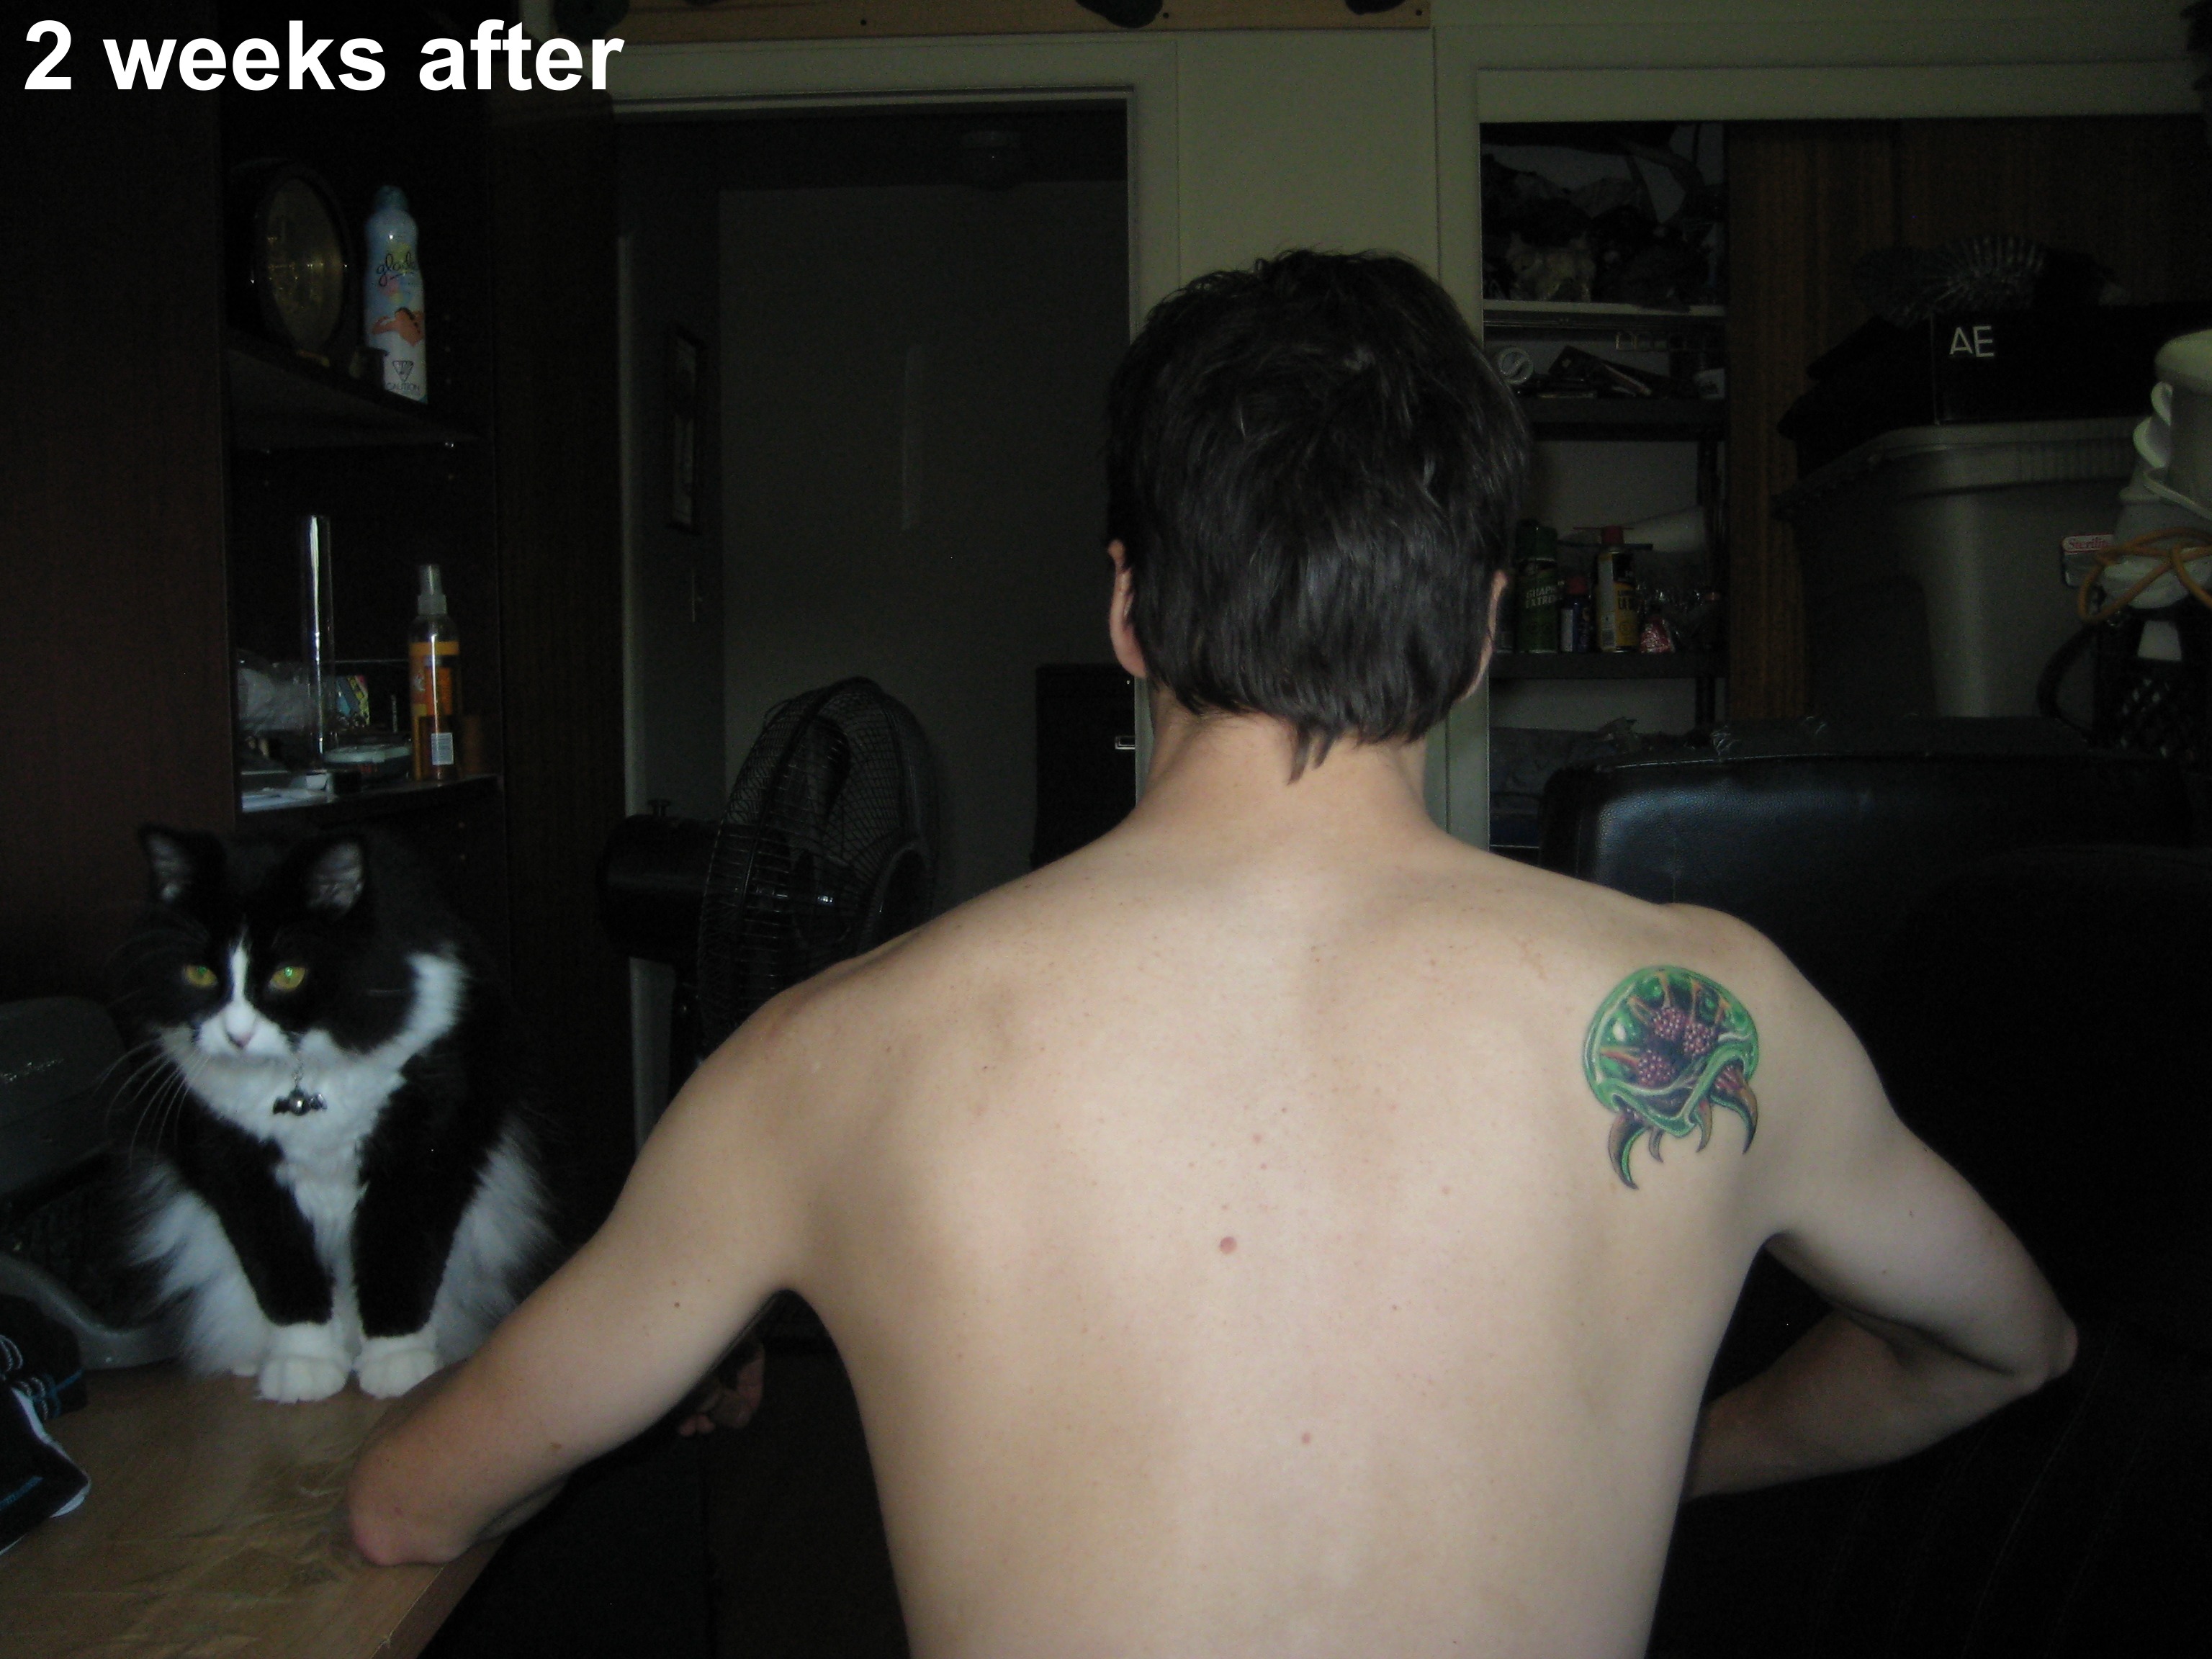 Two weeks after, with the cat beside her, and the Metroid looking healed